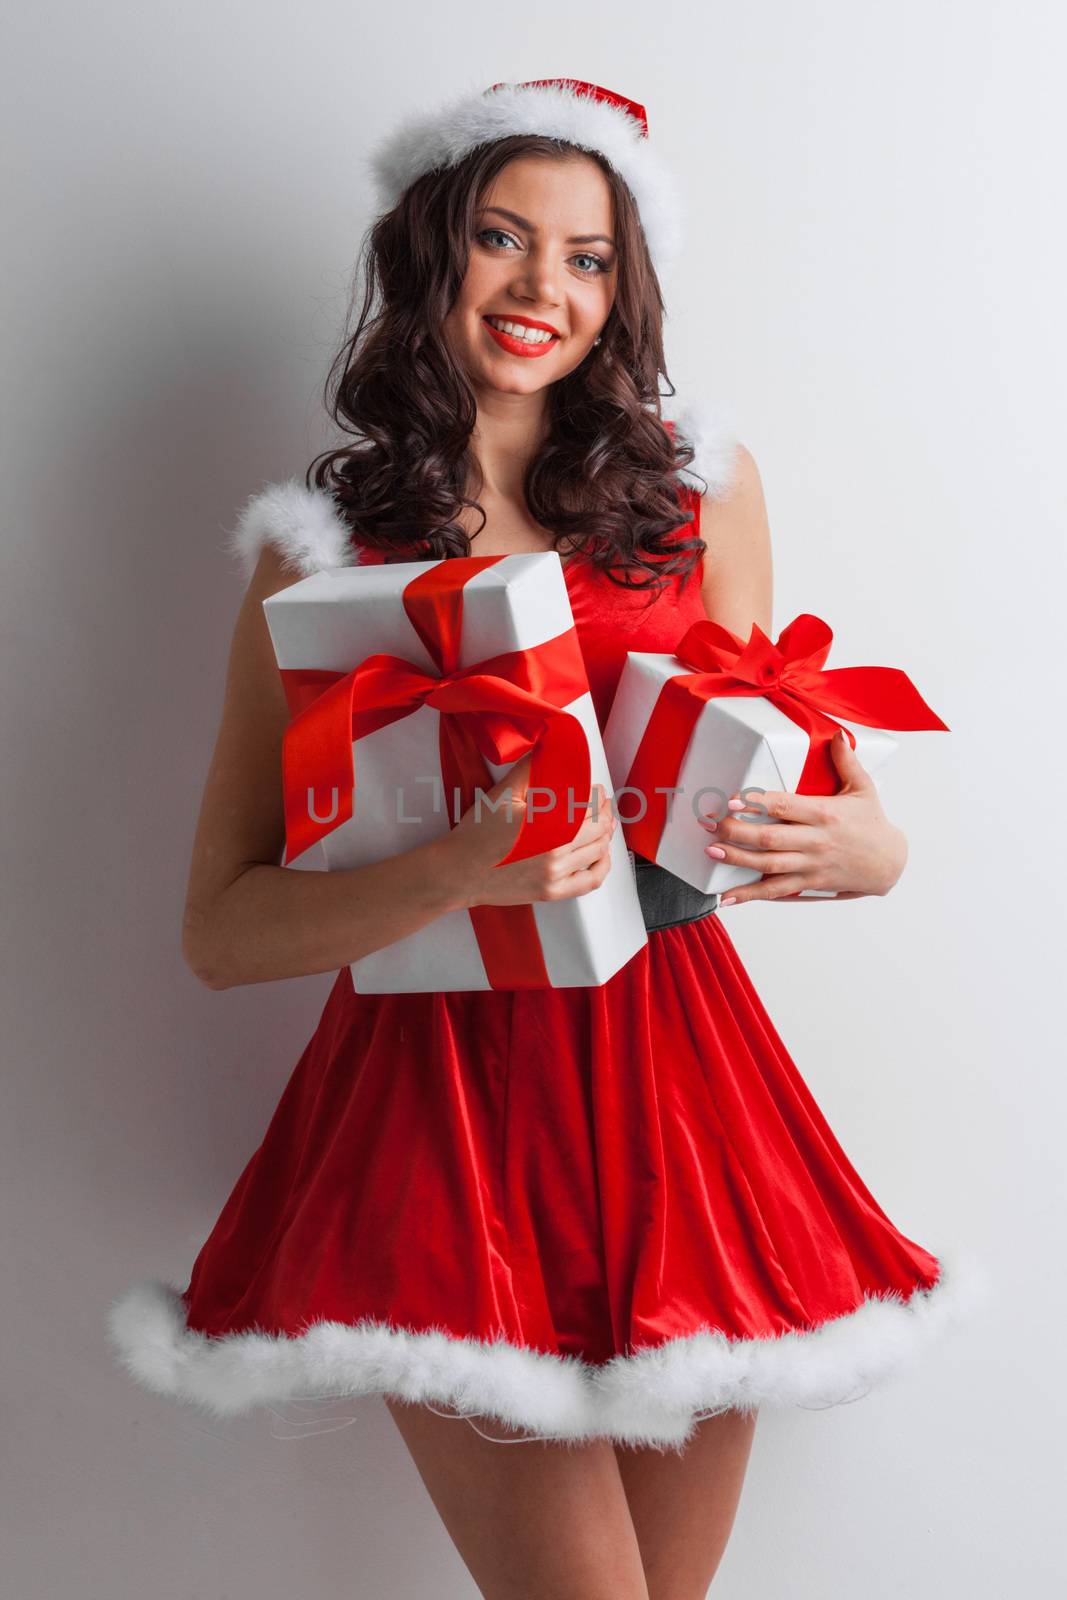 Smiling cute girl in red christmas outfit holding gift boxes